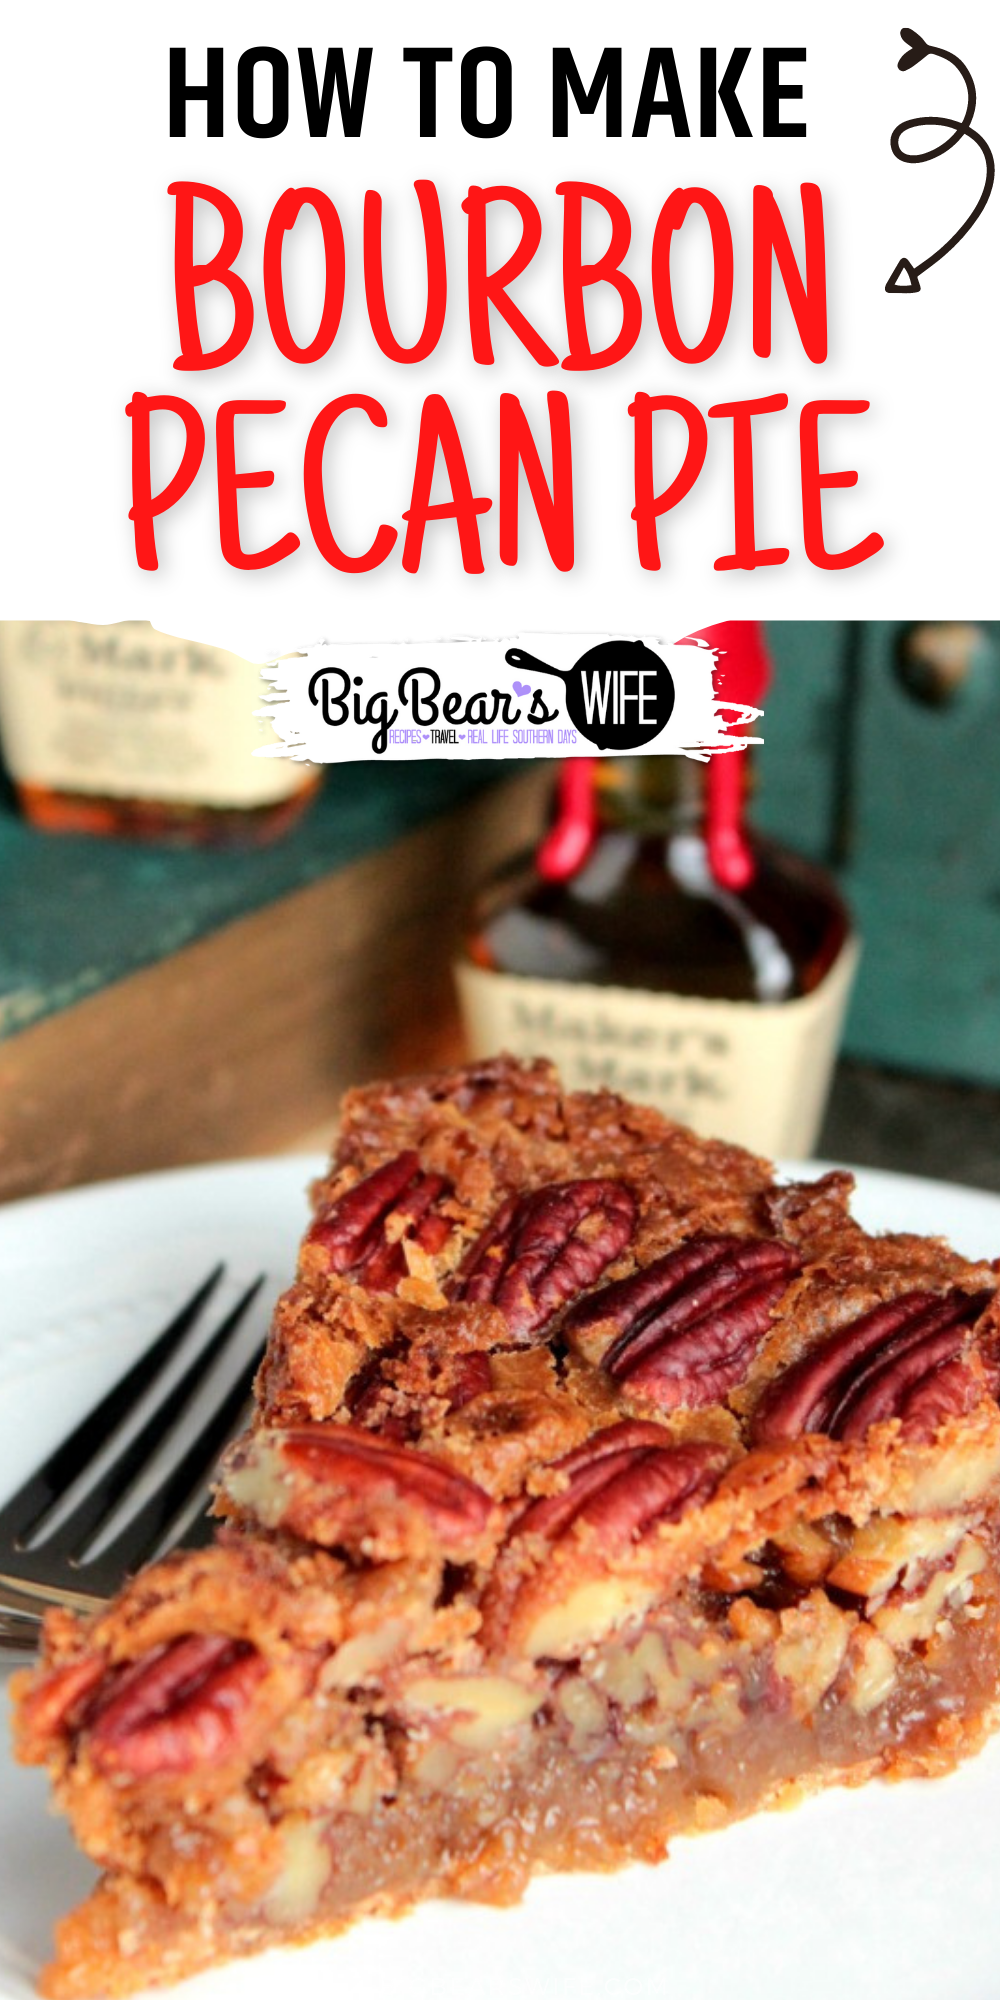  Bourbon Pecan Pie - A sweet classic southern pecan pie with the smooth touch of bourbon baked inside!
 via @bigbearswife